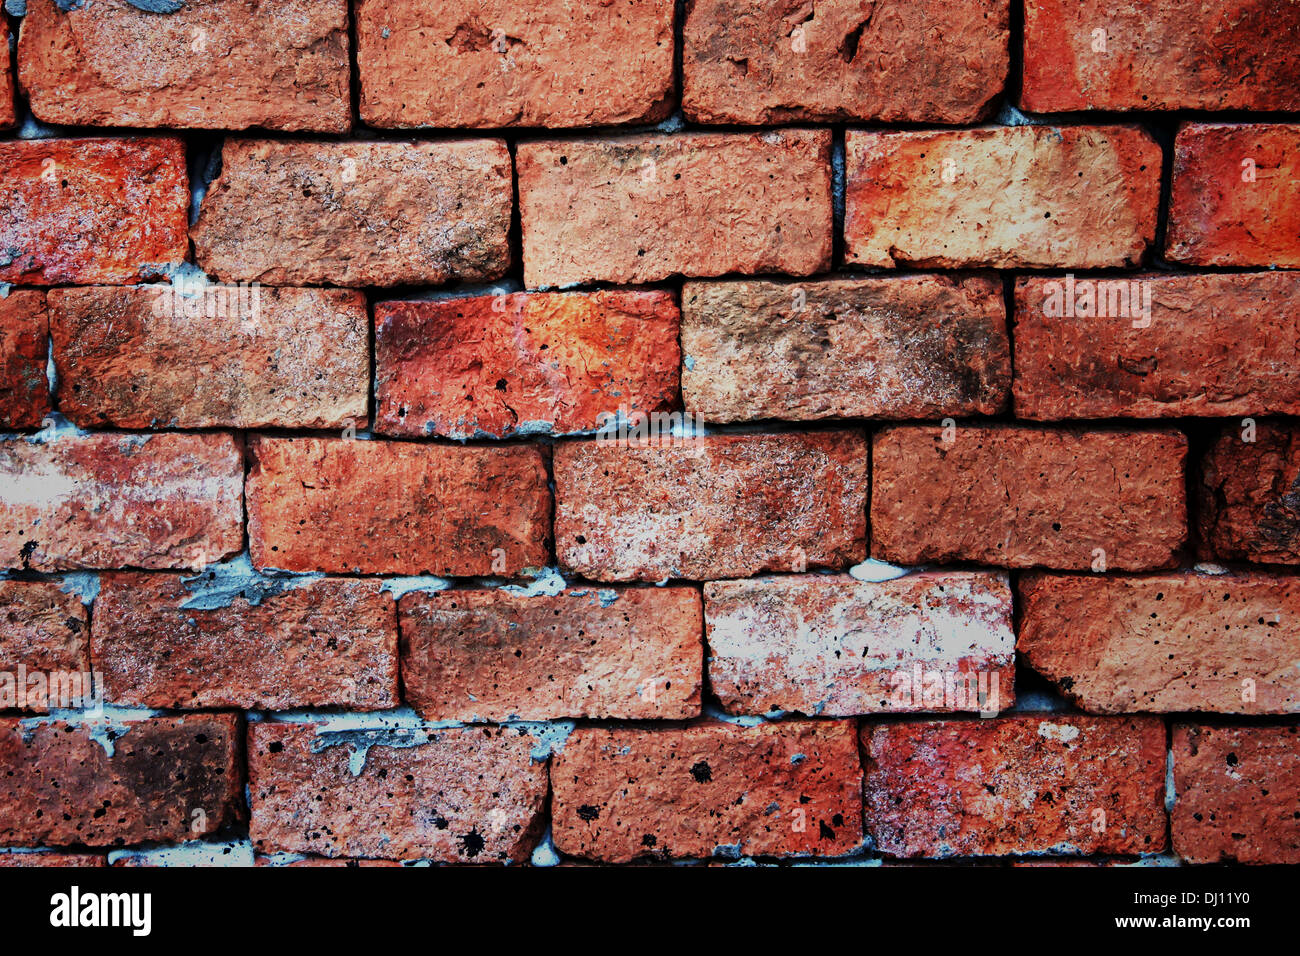 The Brick Background vivid color arising from various types of stone. Stock Photo